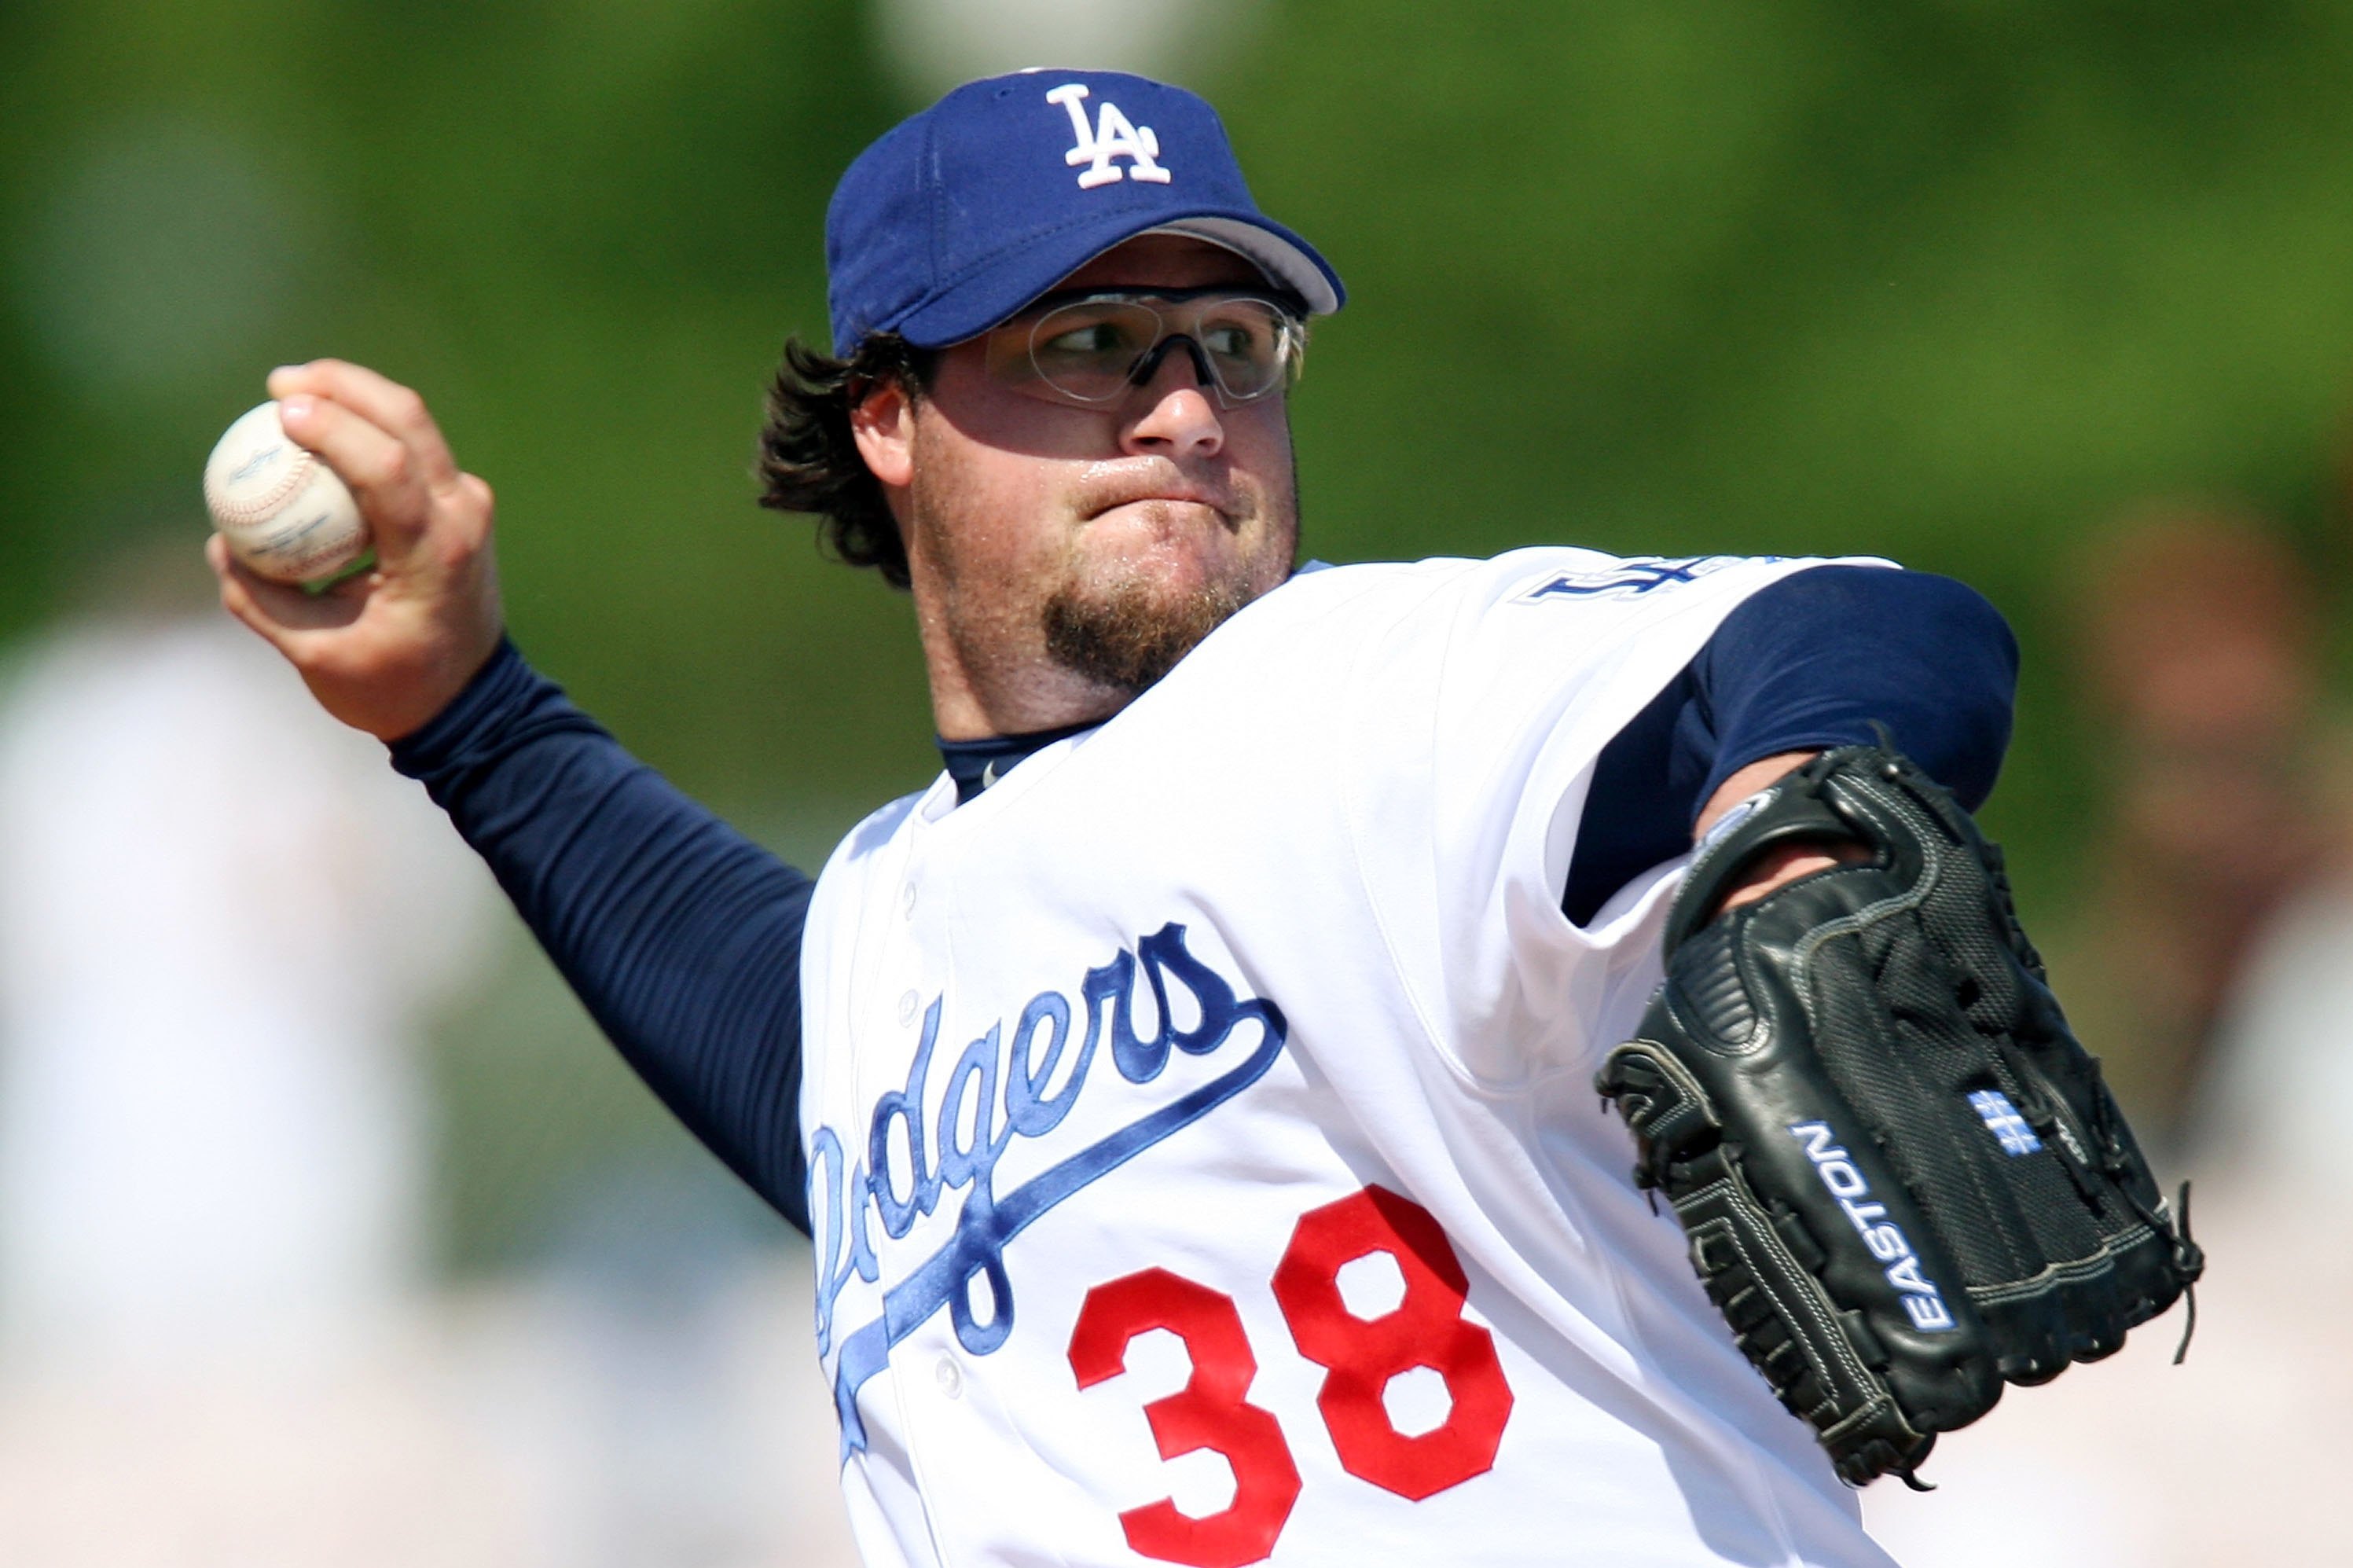 Eric Gagne: Cheap HGH Ploy to Sell Books Will Backfire on Former